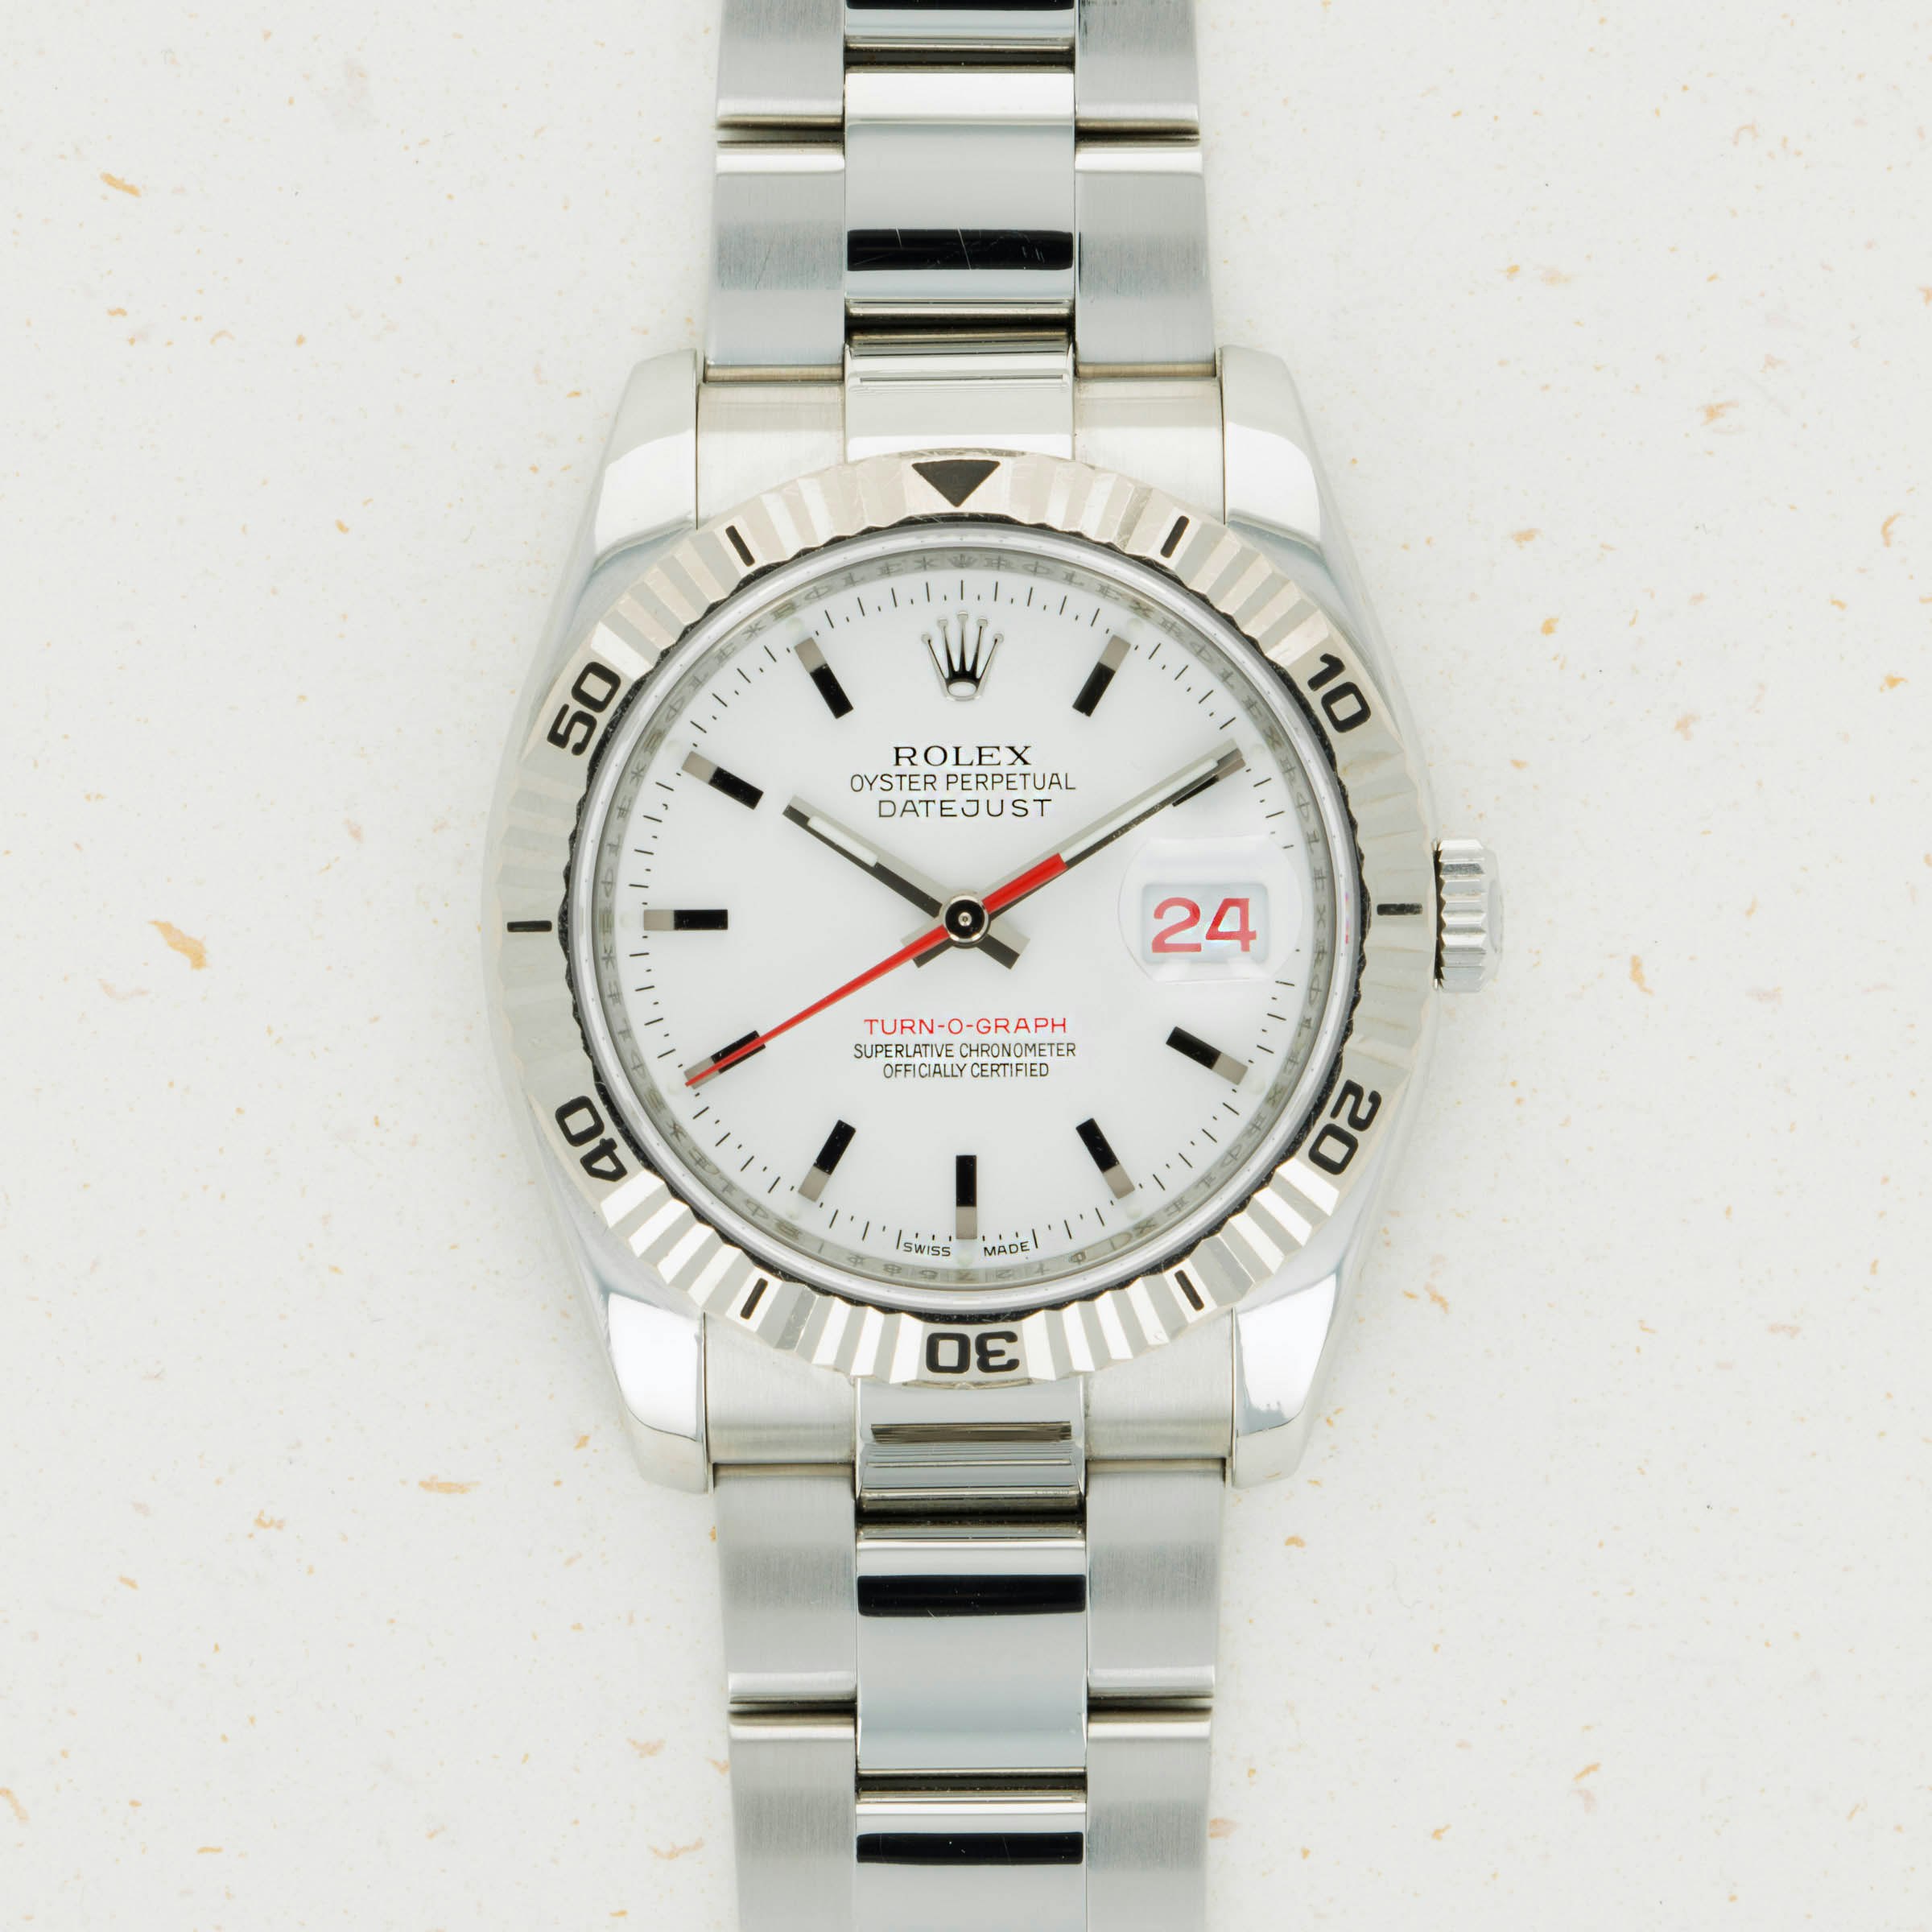 Thumbnail for Rolex Turn-o-Graph 116264 with Guarantee